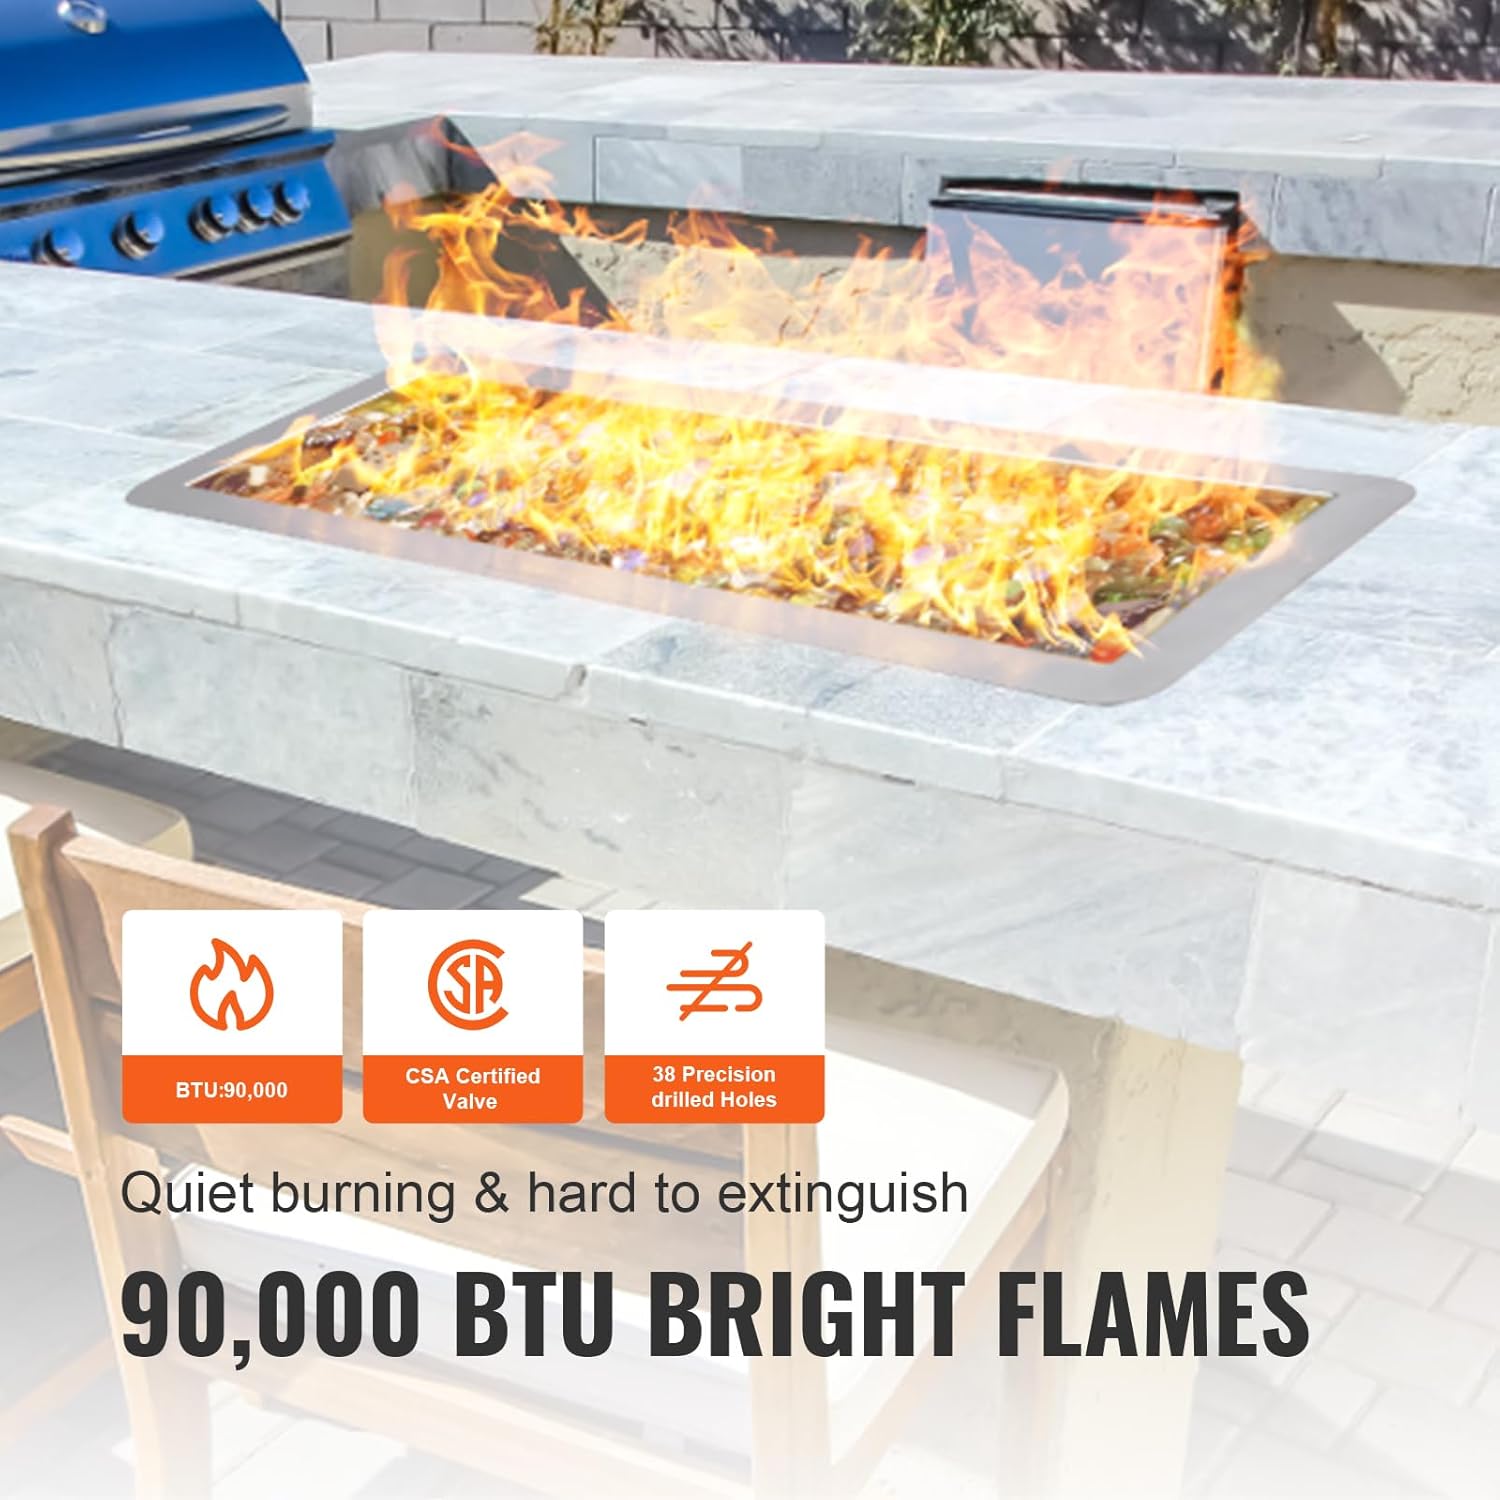 Stainless Steel Fire Pit Burner Kit Review